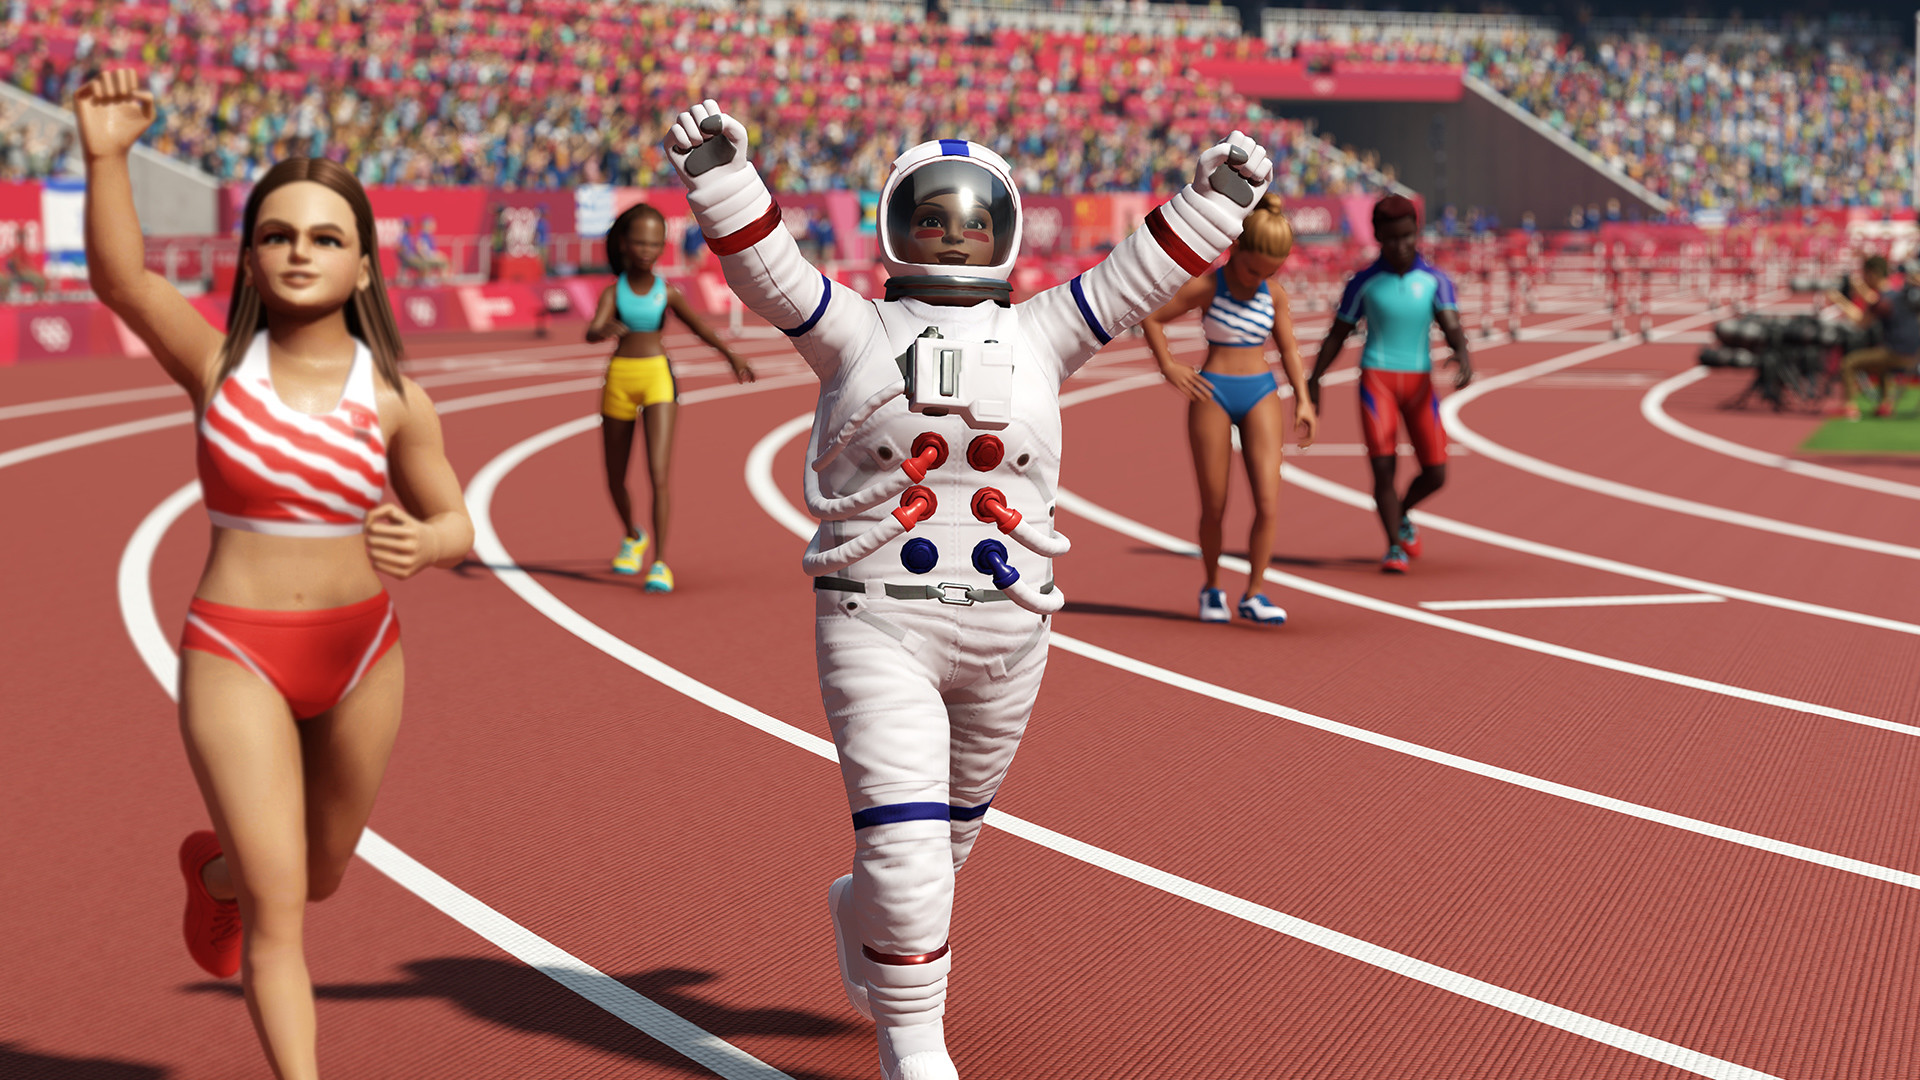 Olympic Games Tokyo 2020 - The Official Video Game EU Steam CD Key, 9.45 usd